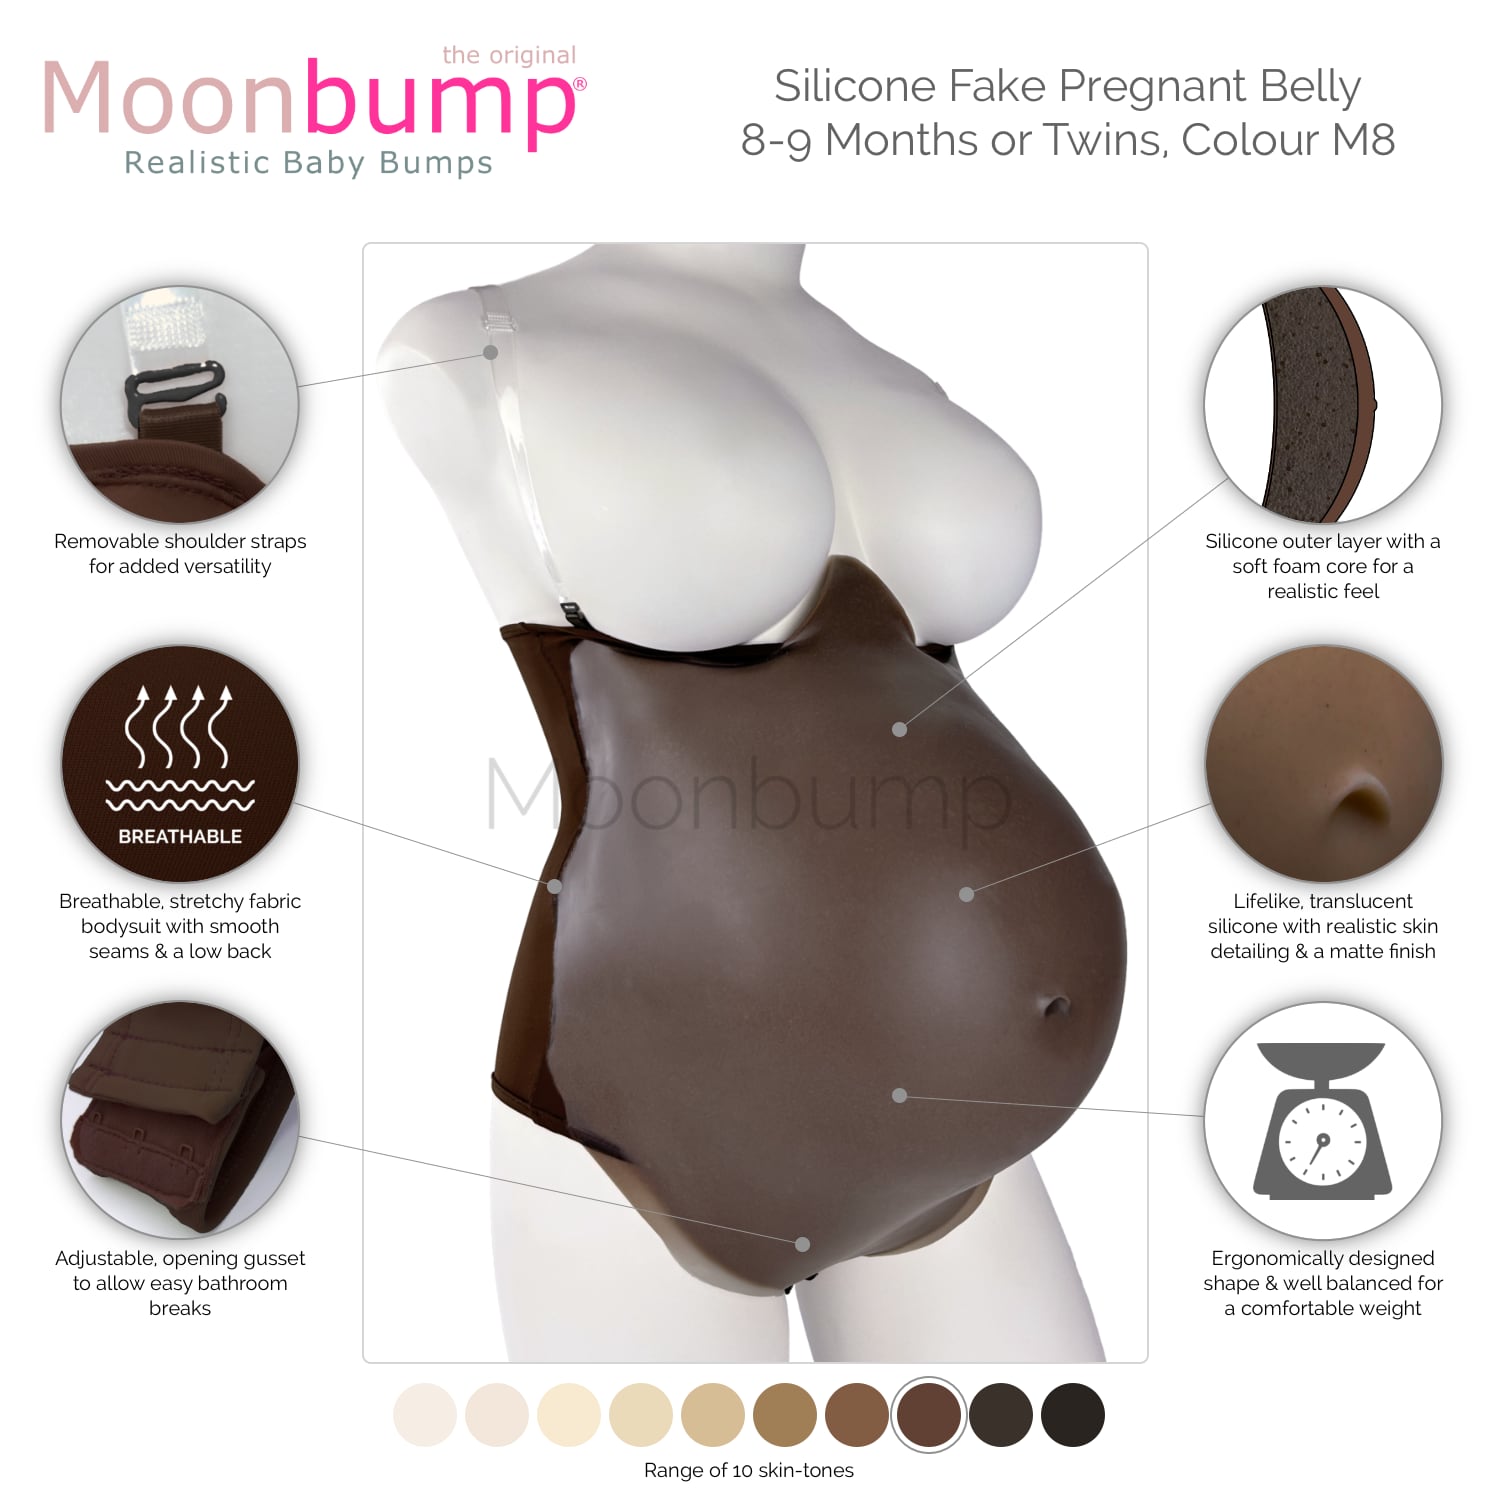 infographic showing the features of our silicone fake pregnant belly 9 months/twins in a chestnut brown skin tone